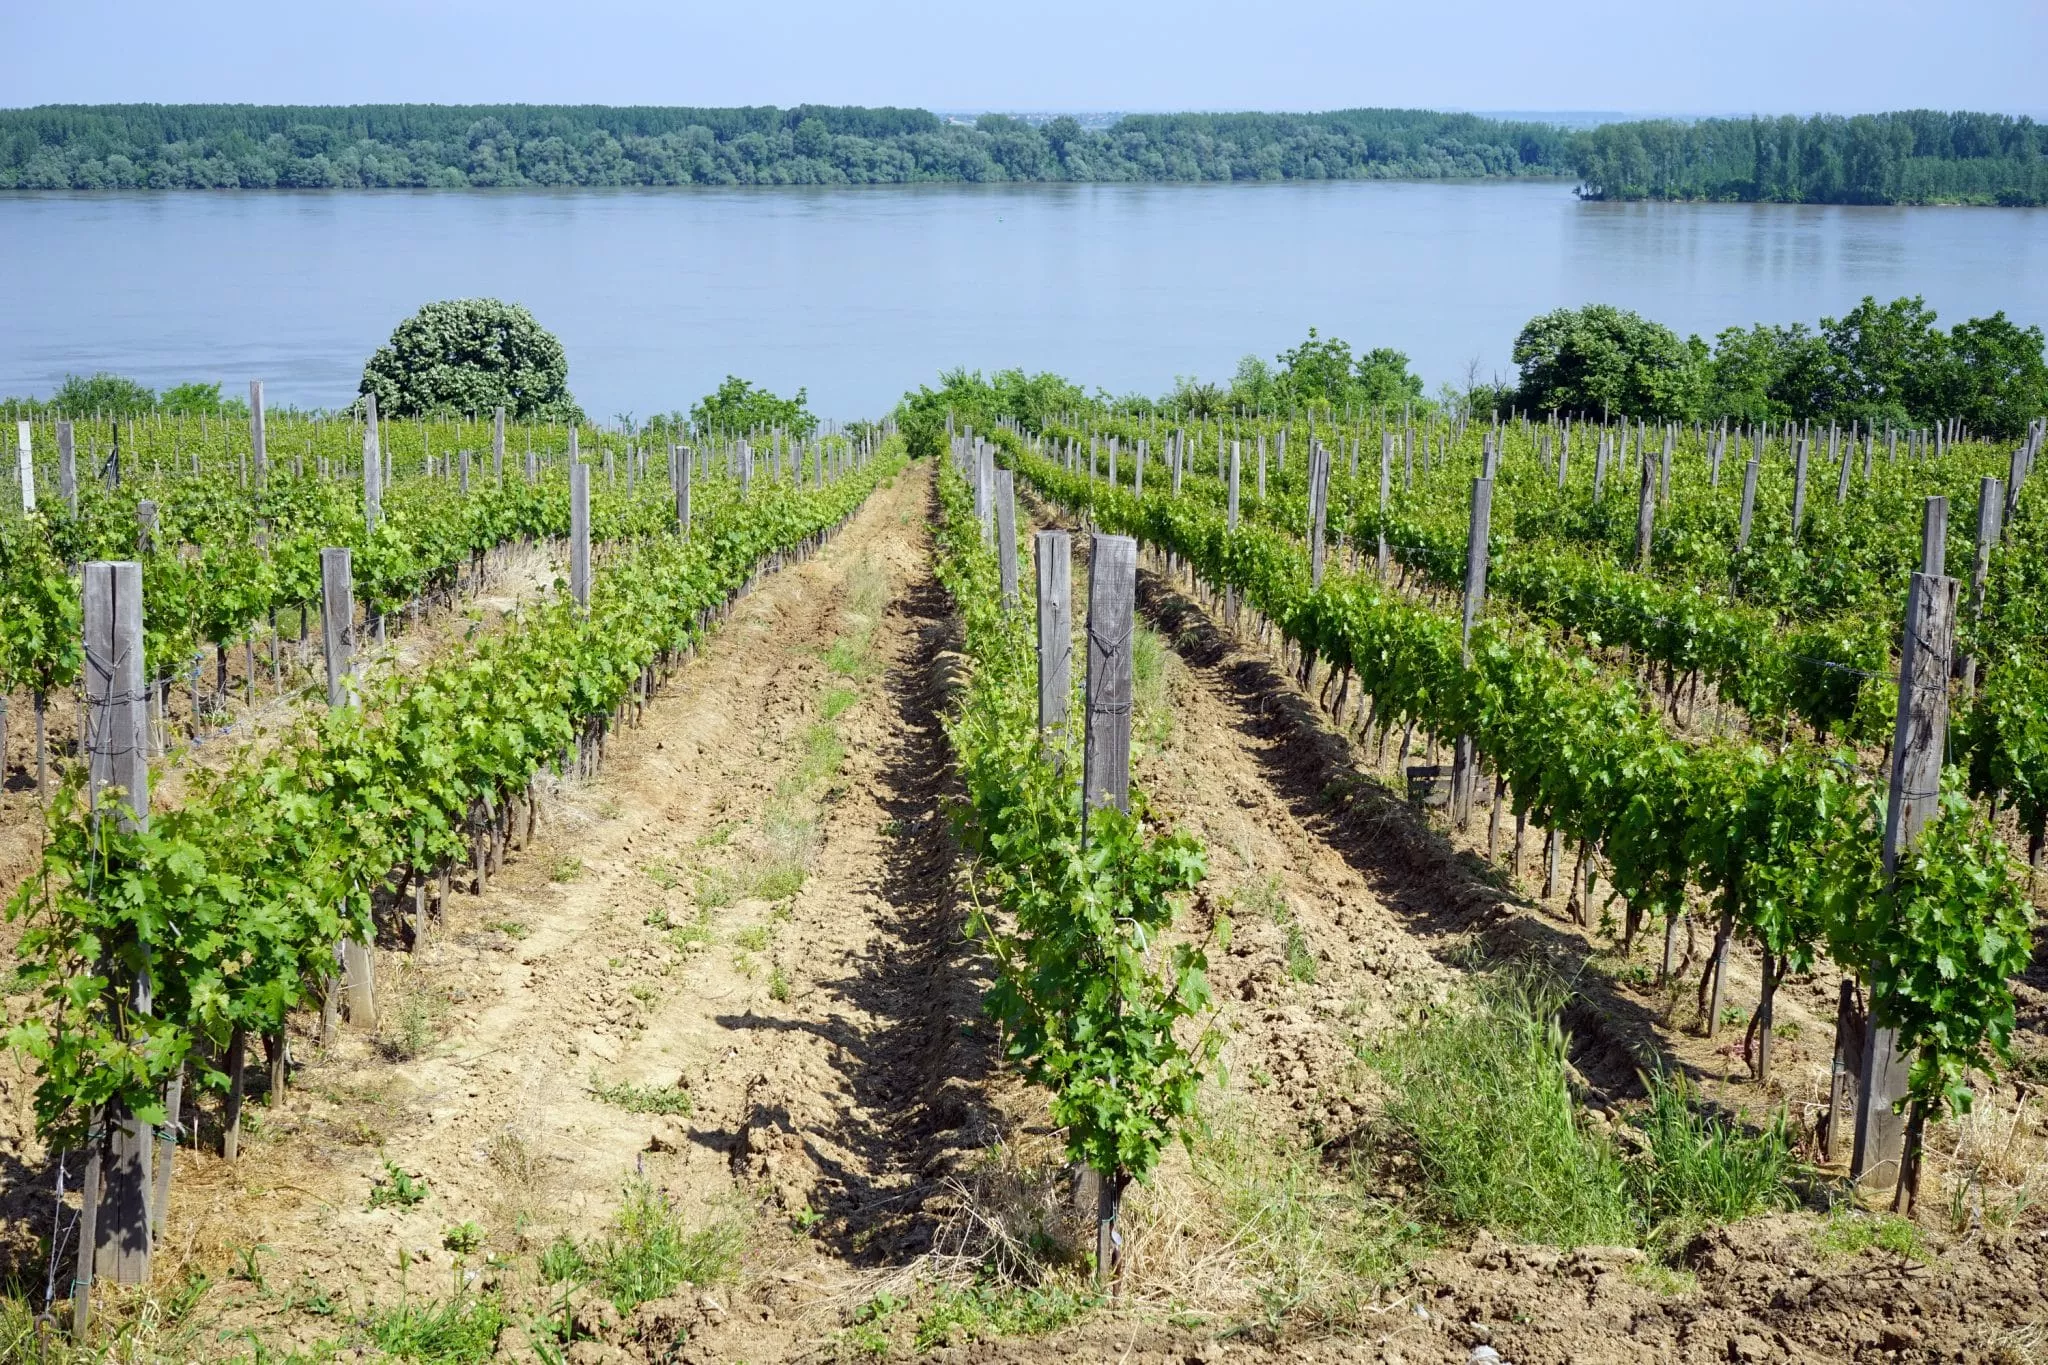 Vineyards-on-the-Danube-River-scale-2